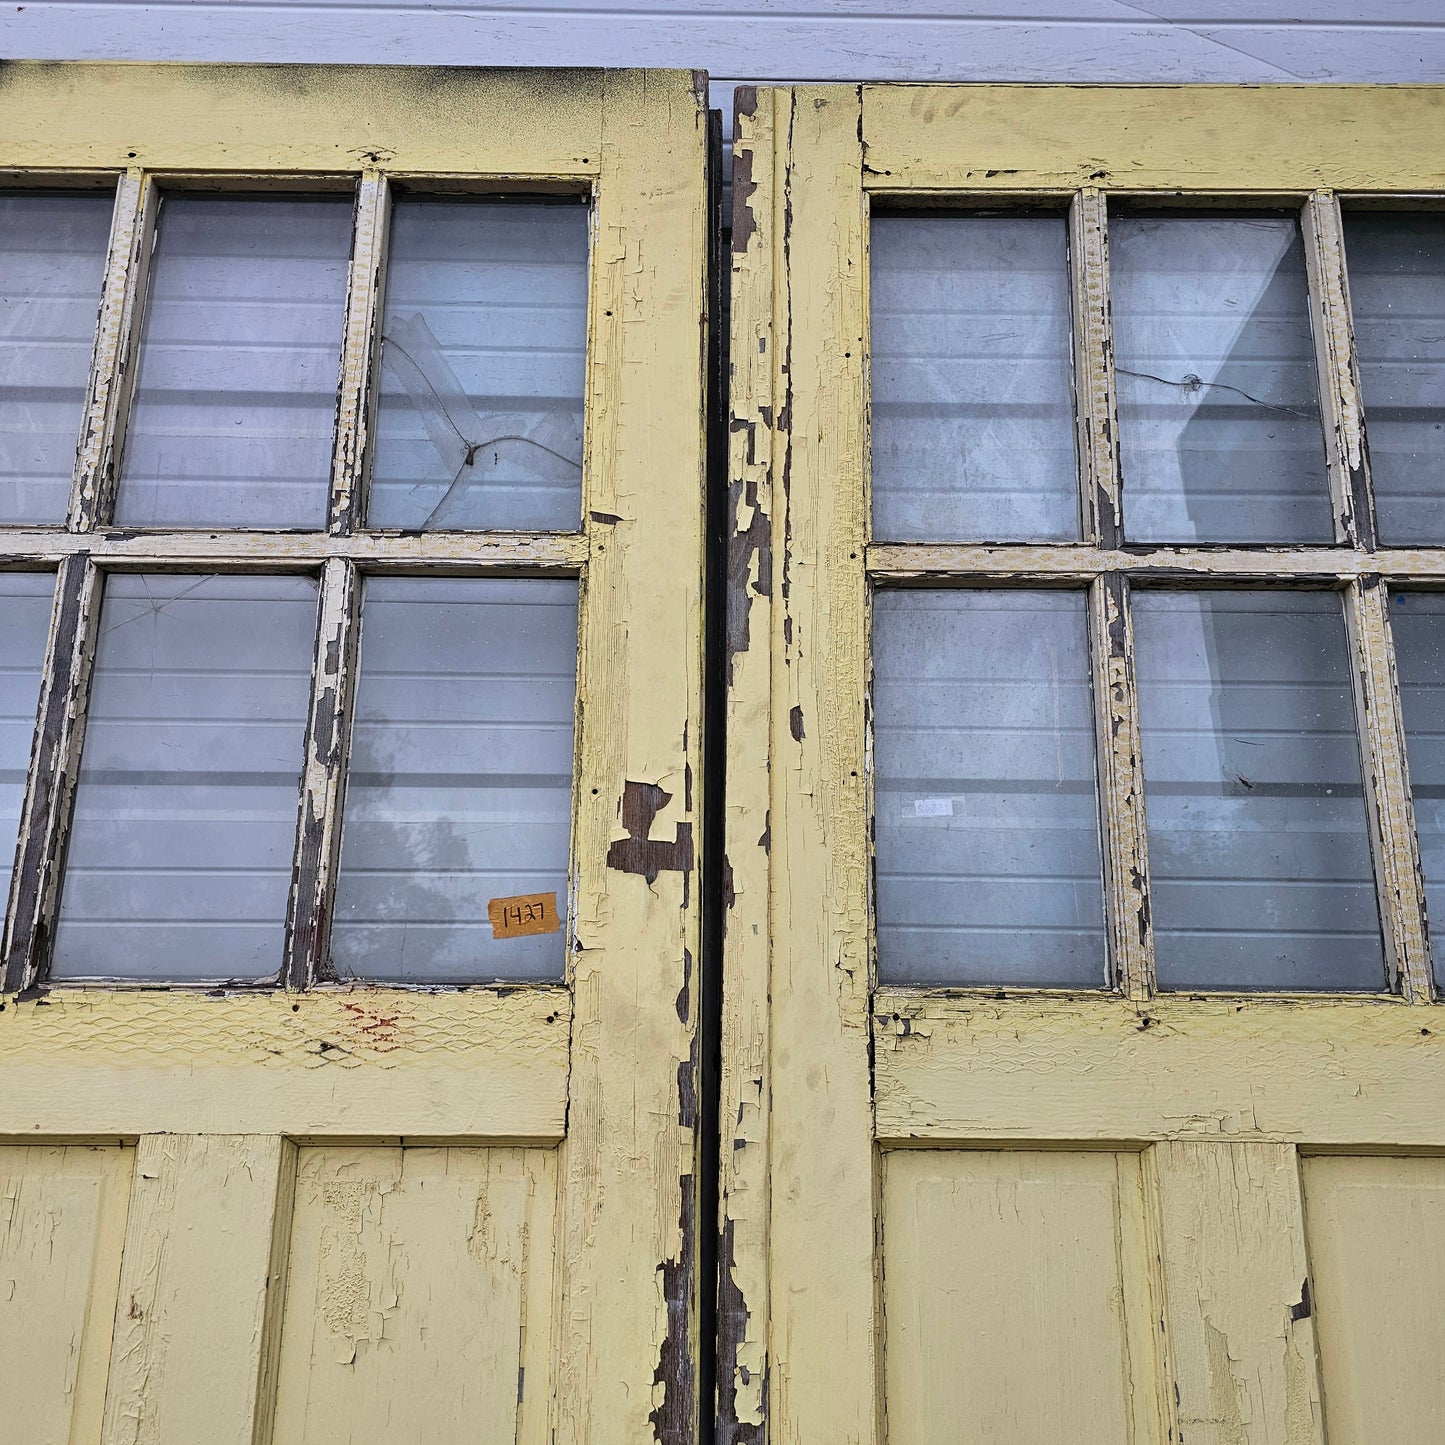 Pair of Large Yellow Carriage House Doors with 6 Lites